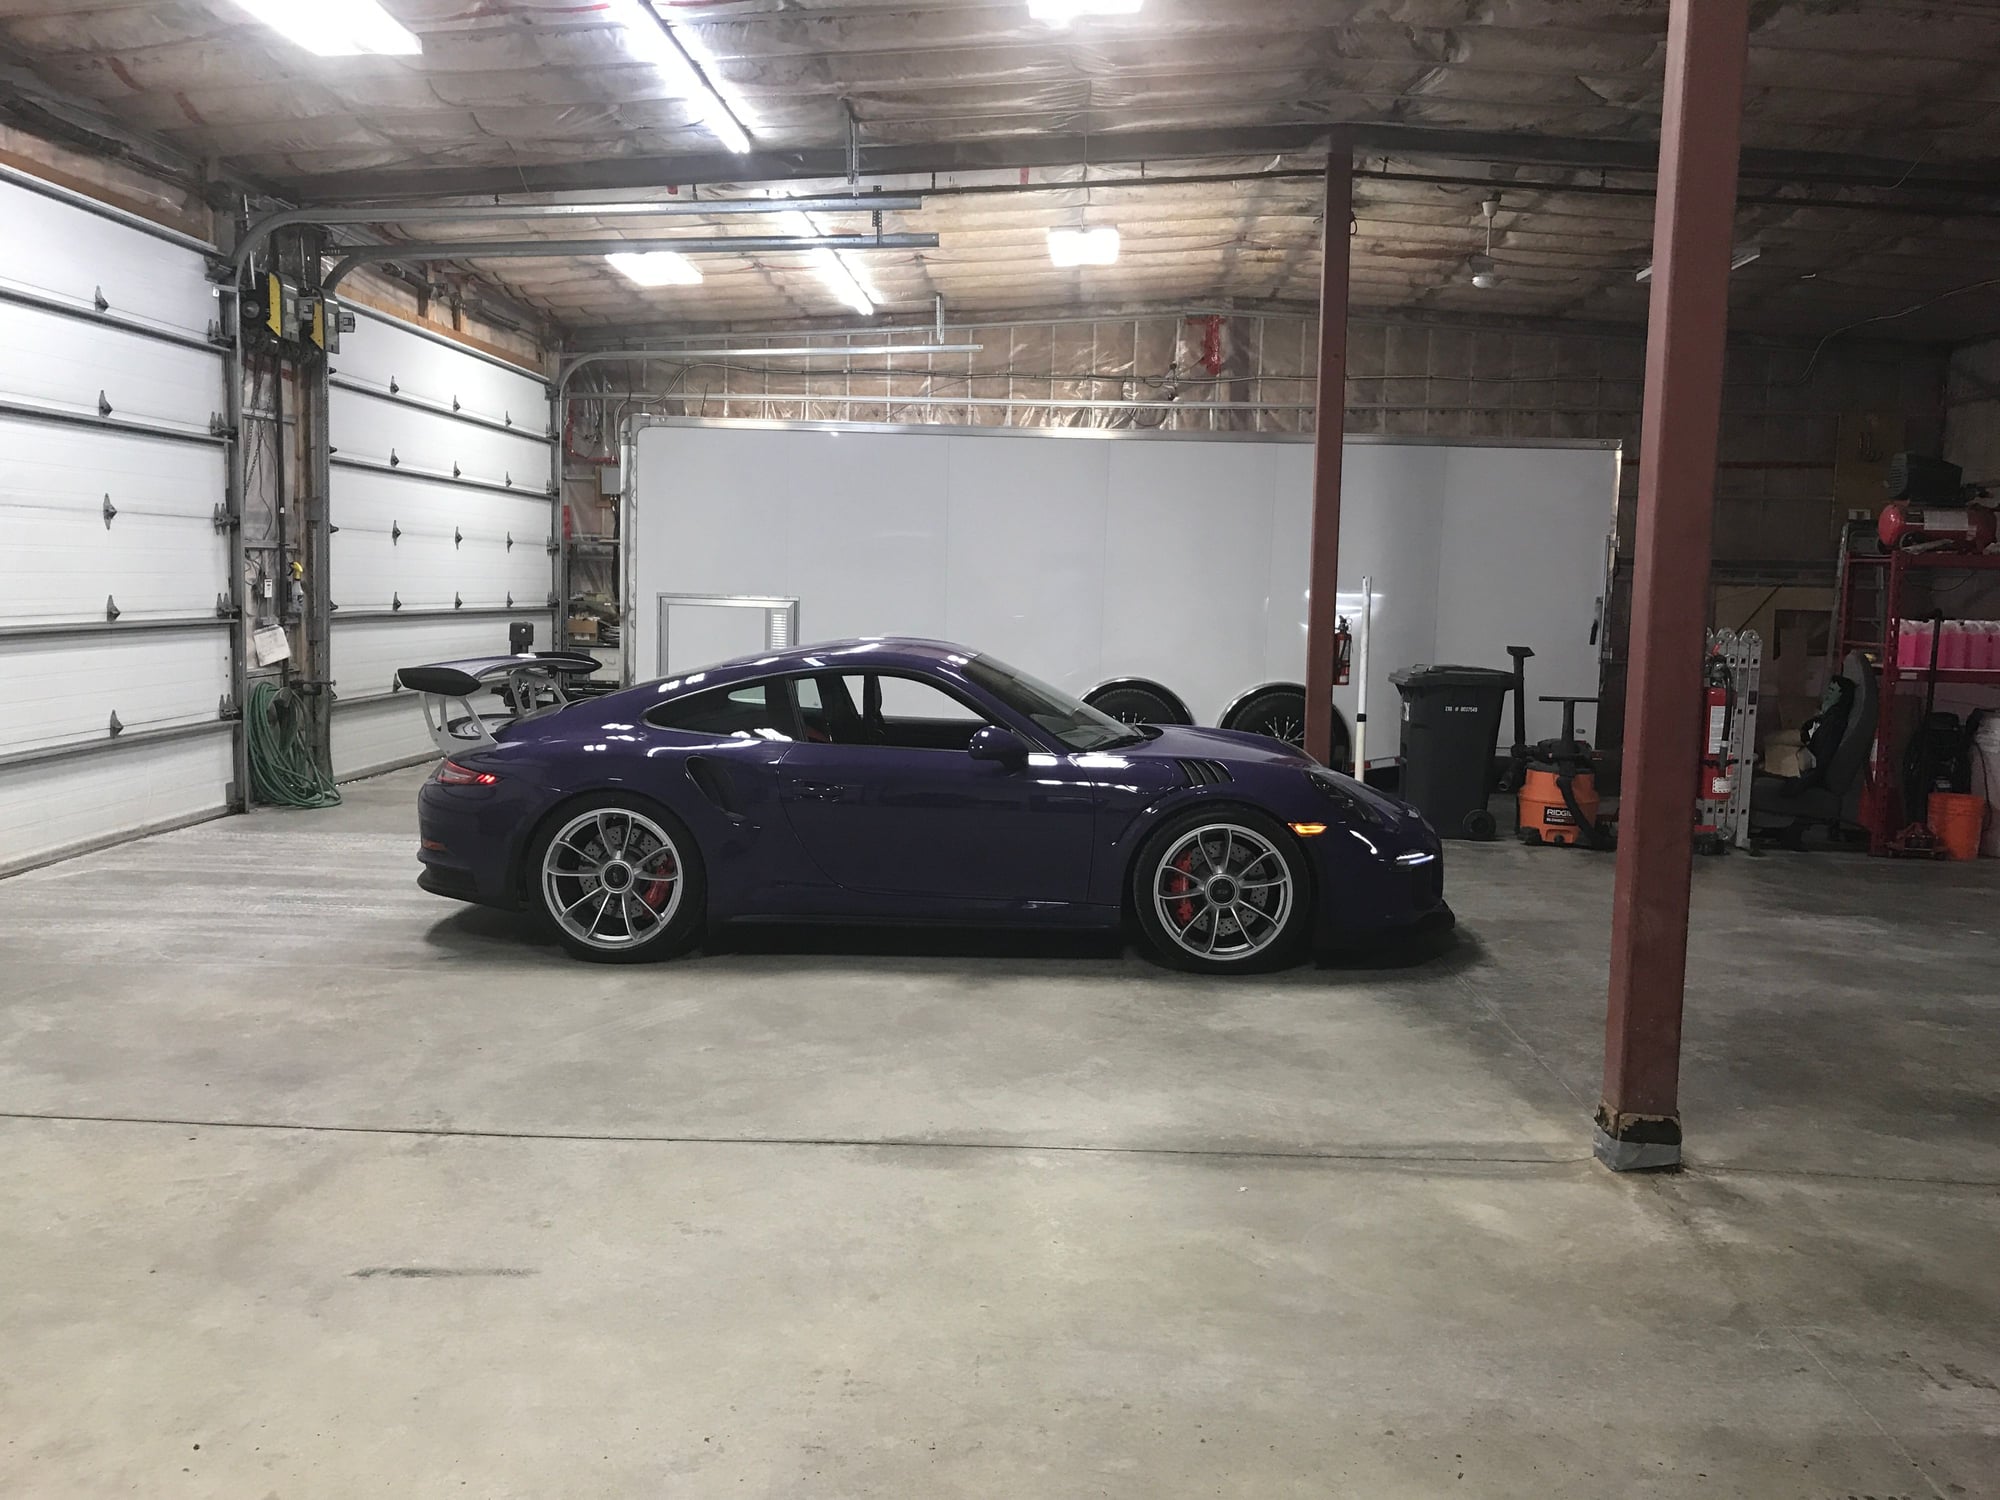 2016 Porsche GT3 - 2016 Ultraviolet GT3 RS for sale - Used - VIN WP0AF2A90GS193177 - 14,000 Miles - 6 cyl - 2WD - Automatic - Coupe - Purple - Sherbrooke, QC J1N1S4, Canada